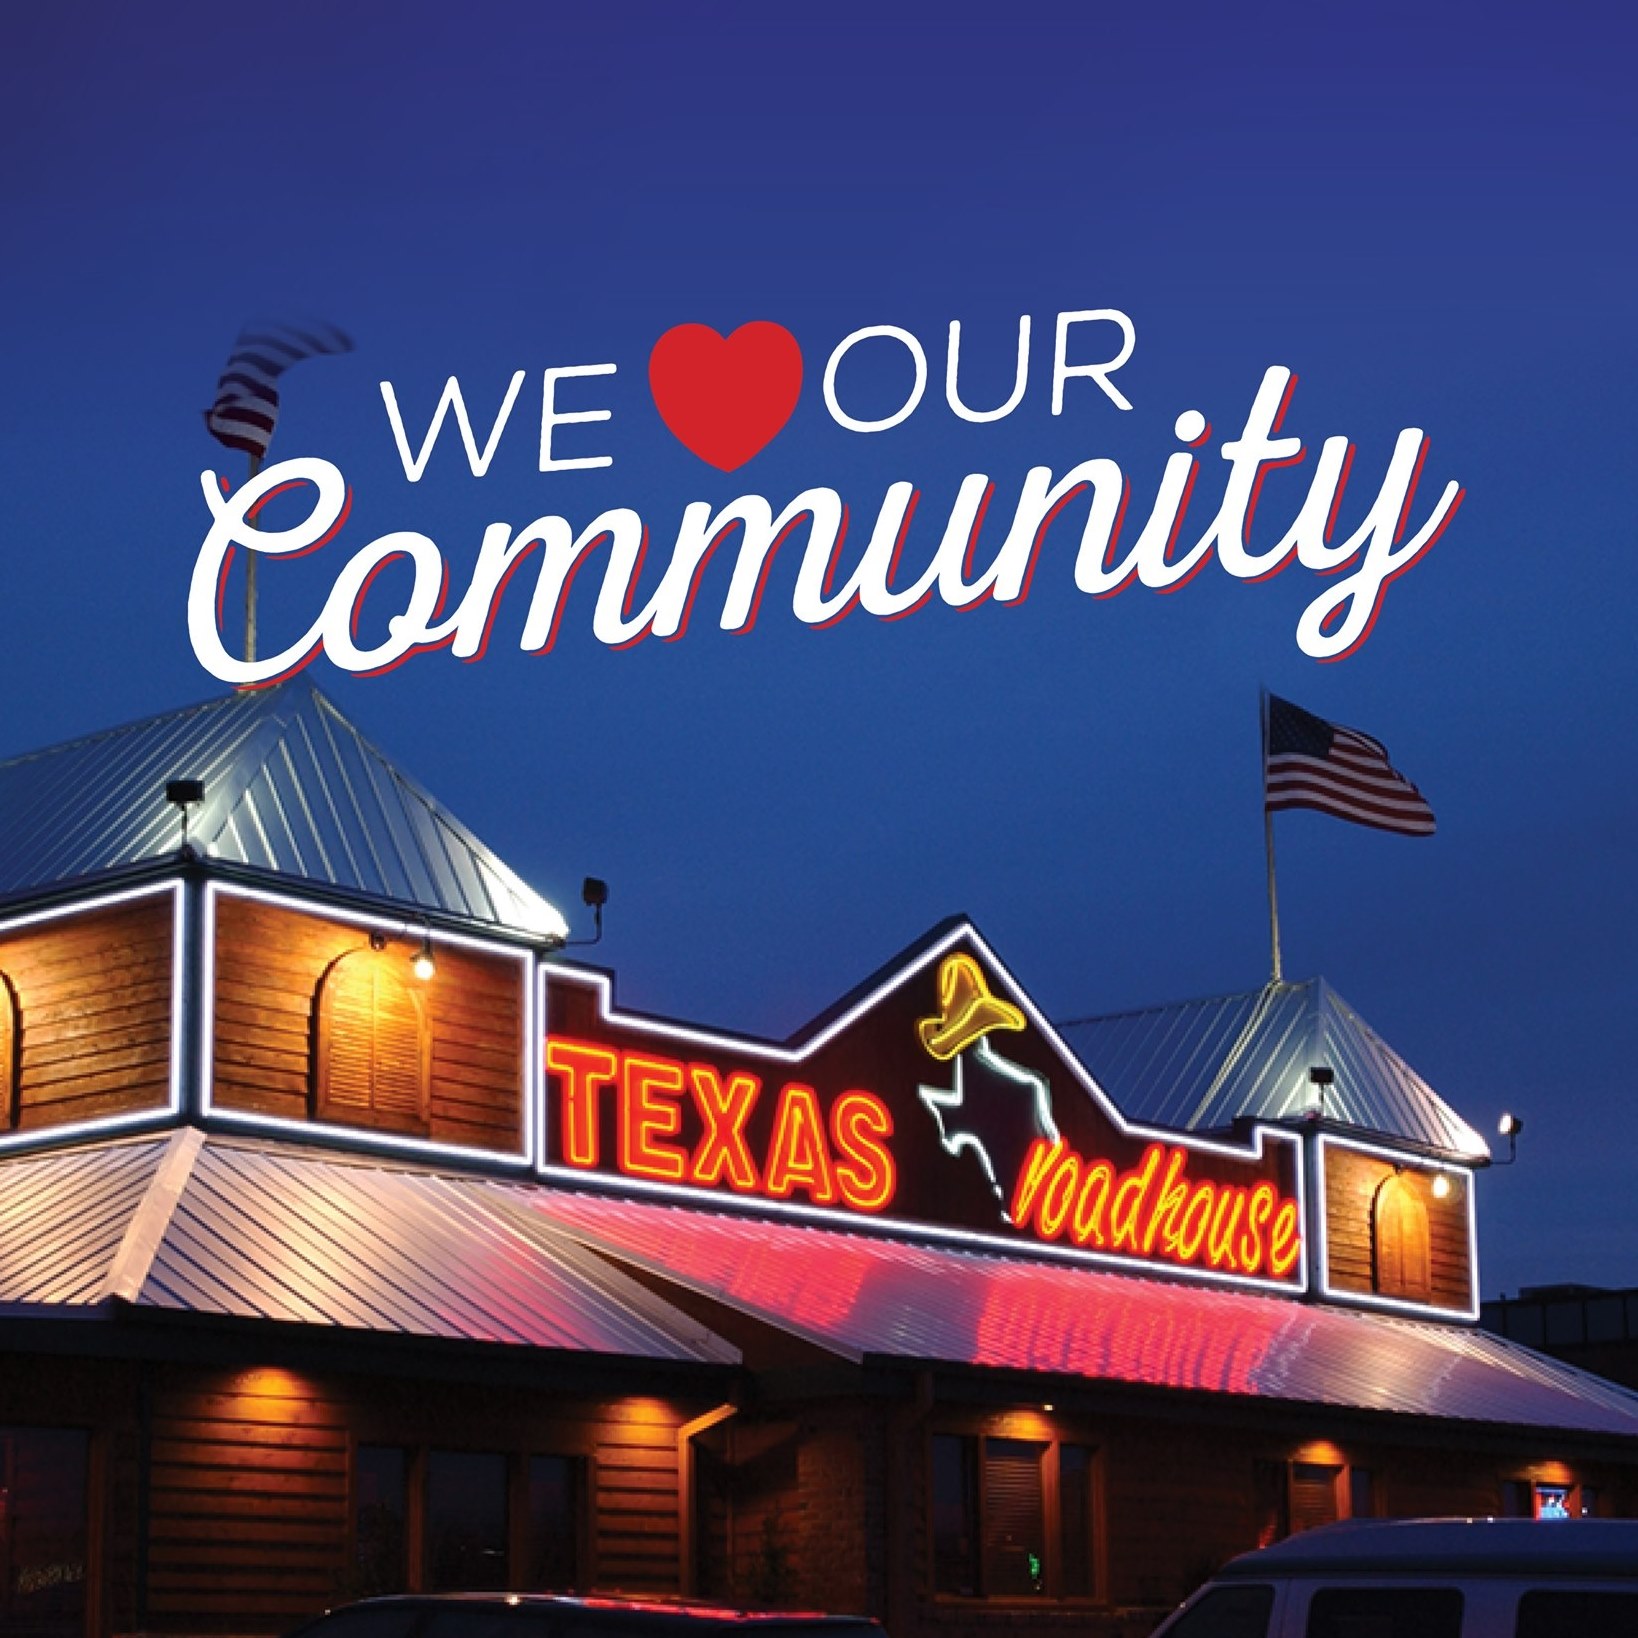 Bristol, Virginia Texas Roadhouse set to open this month; positions